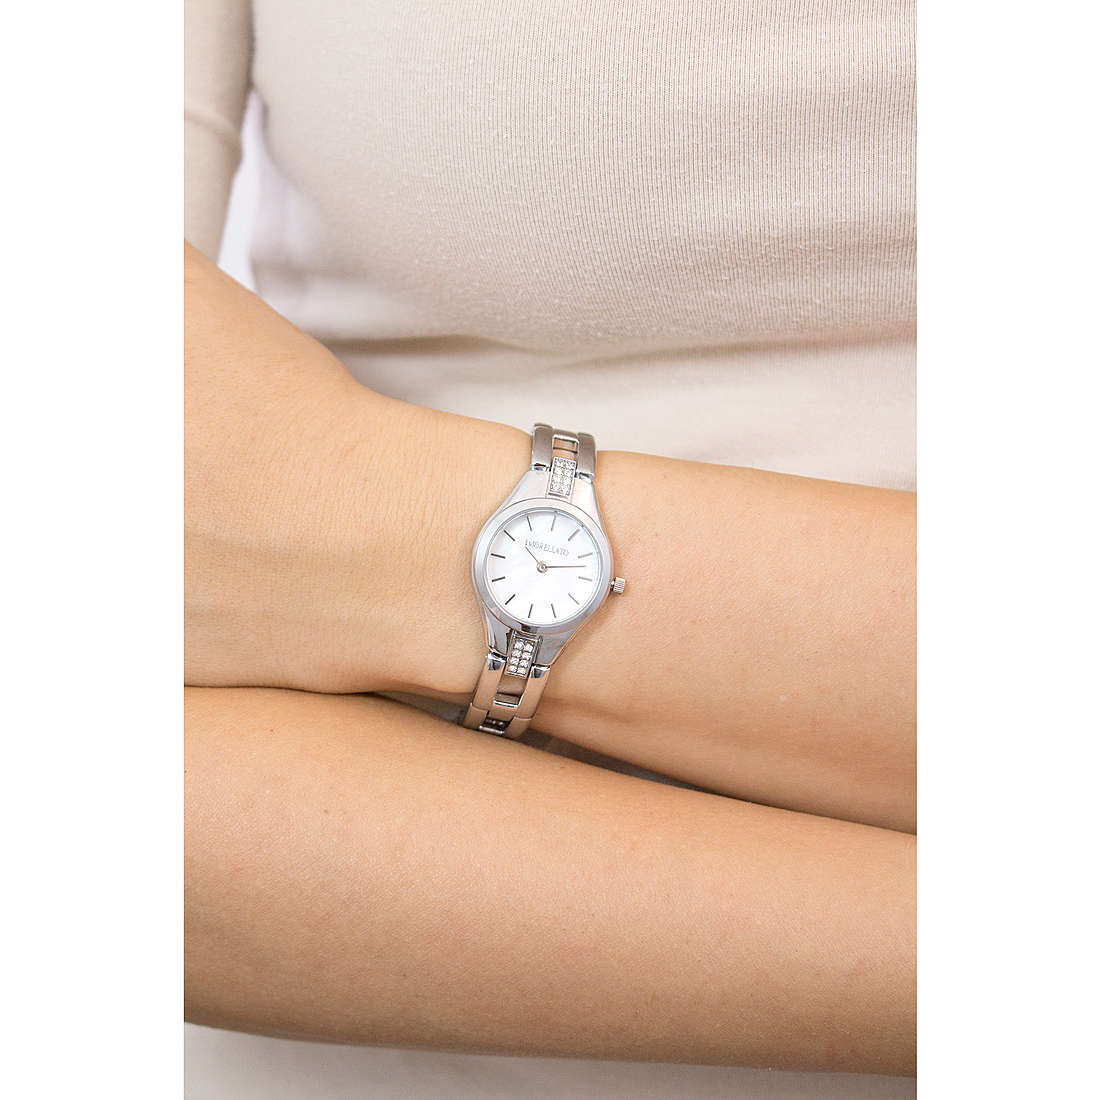 Morellato only time Gaia woman R0153148504 wearing